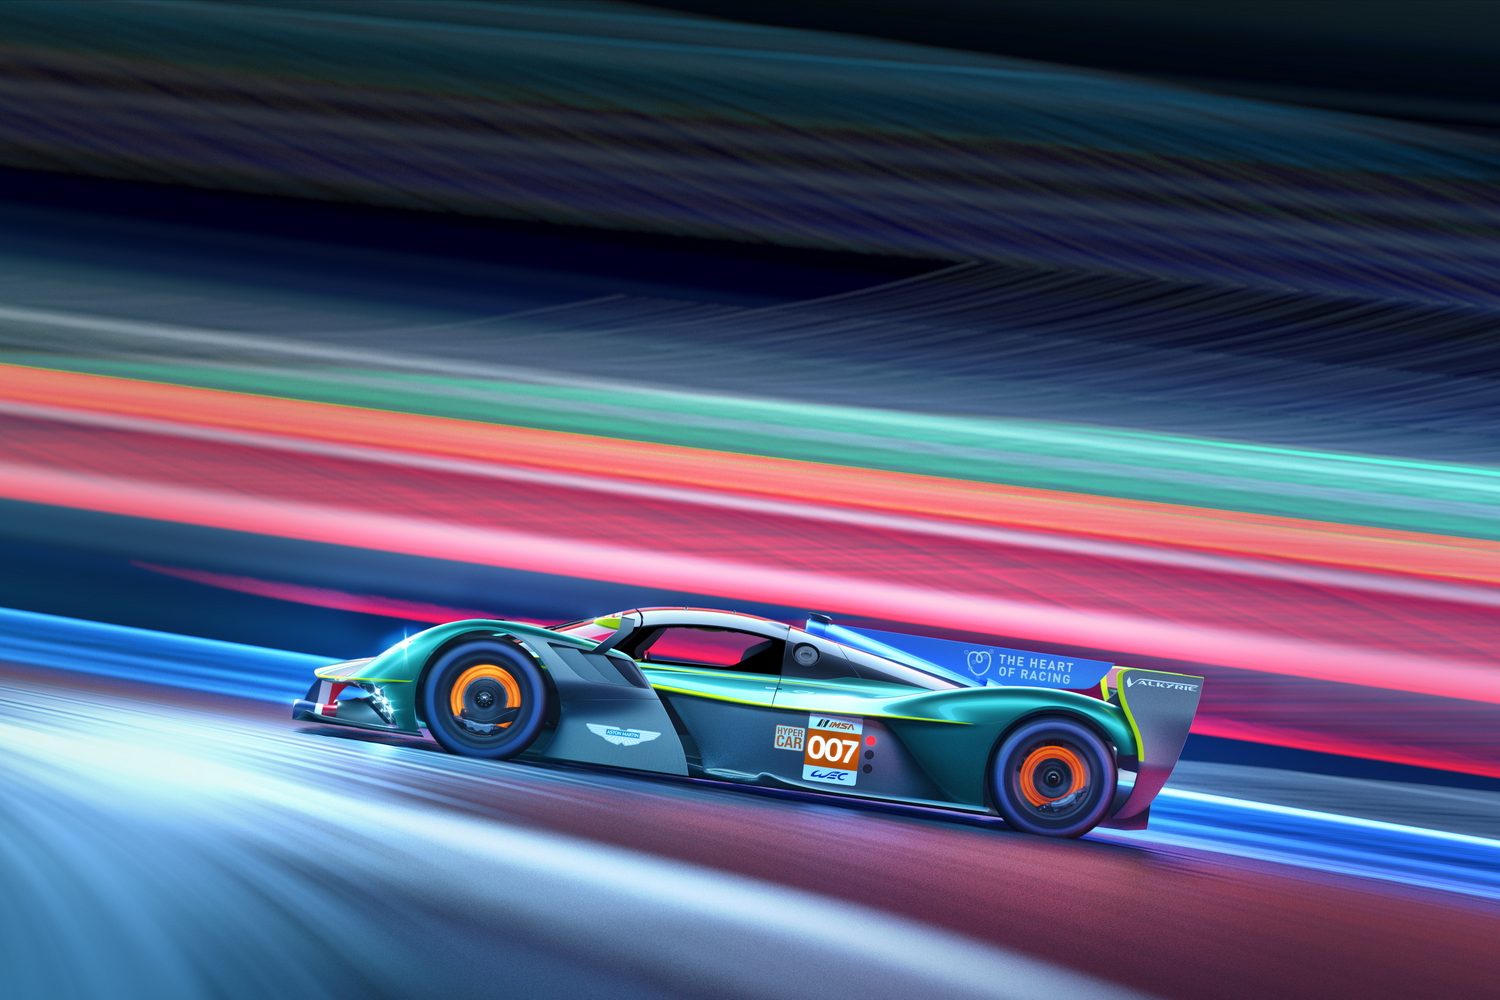 Aston Martin Valkyrie will race at Le Mans in 2025. Image by Aston Martin.